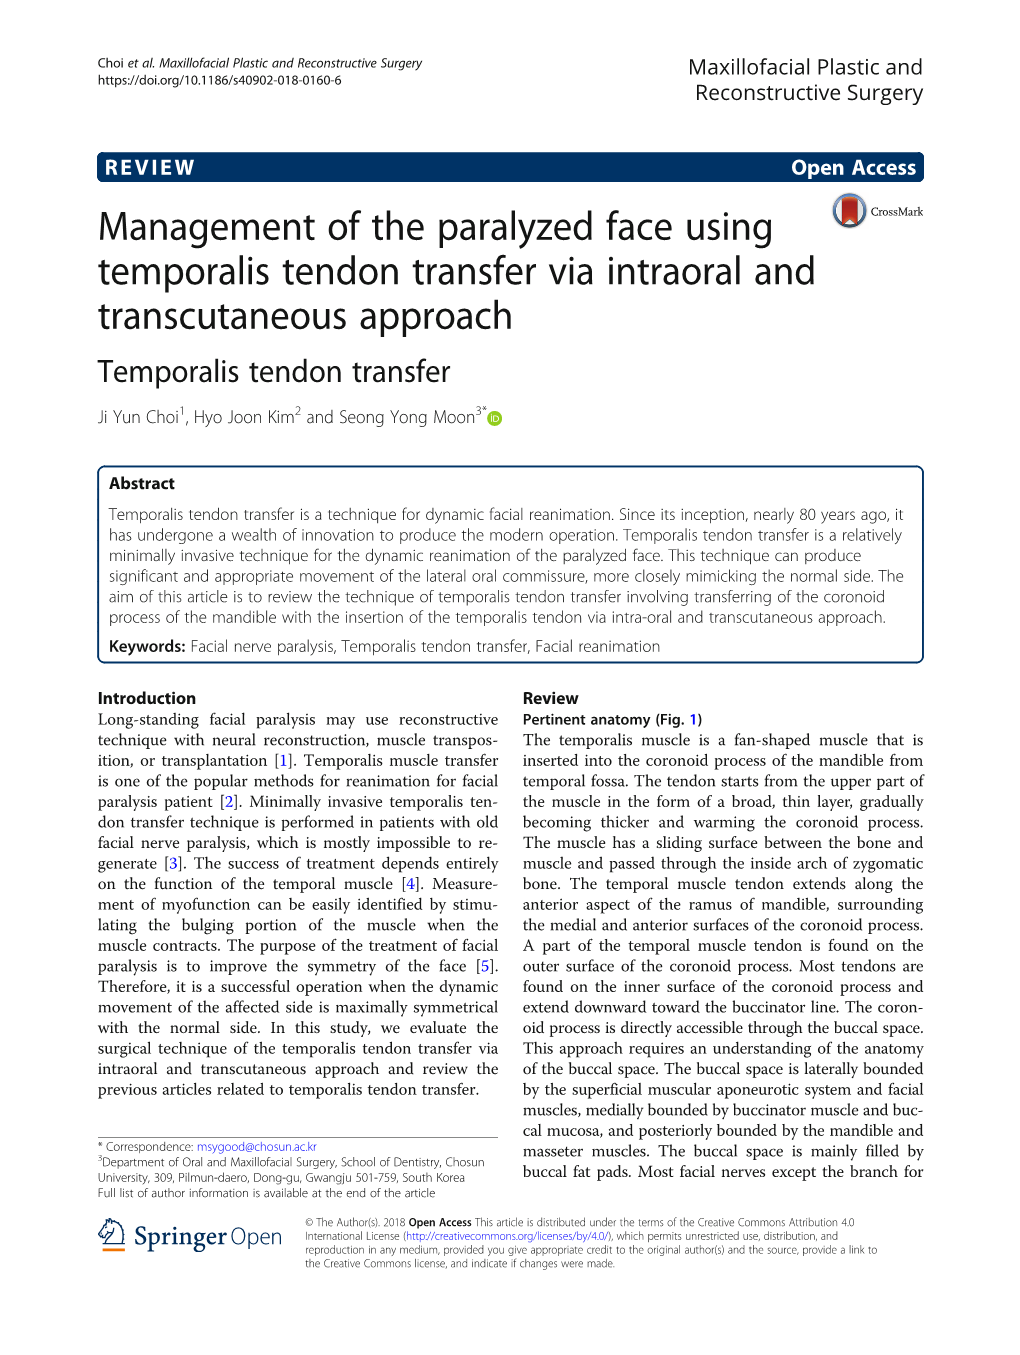 Management of the Paralyzed Face Using Temporalis Tendon Transfer Via Intraoral and Transcutaneous Approach Temporalis Tendon Transfer